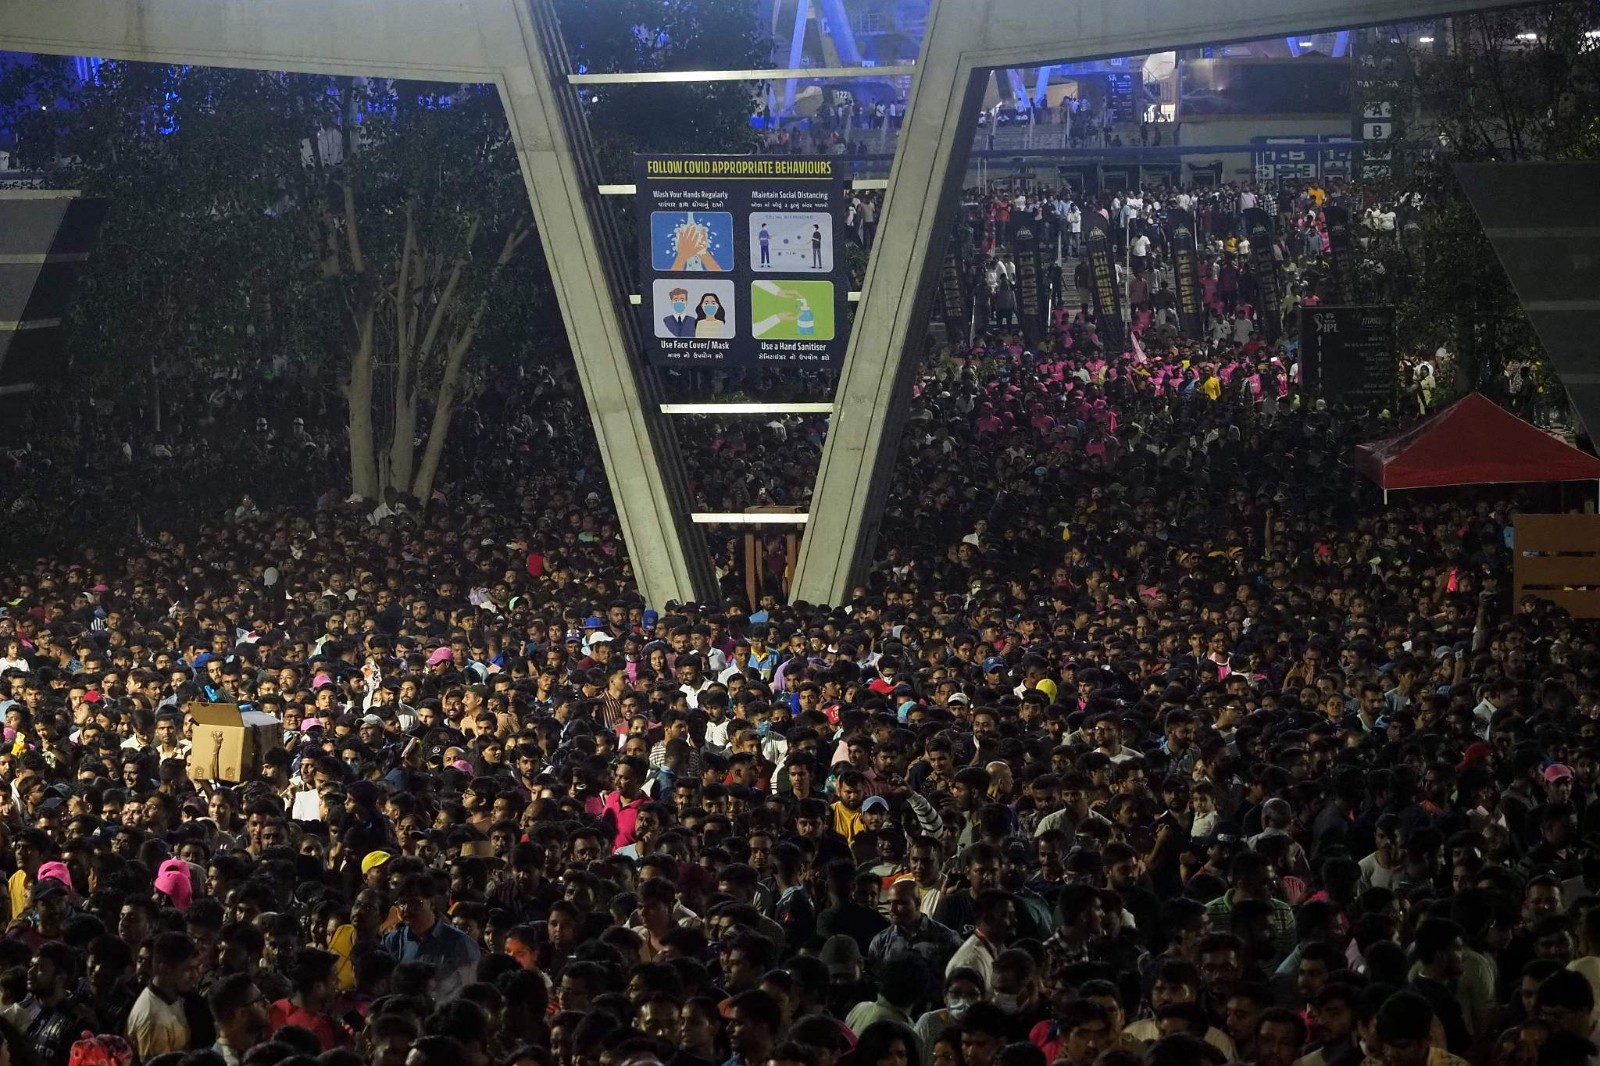 In this file photo taken on April 16, 2023, spectators leave the Narendra Modi Stadium after watching the Indian Premier League T20 cricket match between Gujarat Titans and Rajasthan Royals in Ahmedabad, India. IPL games draw thousands to stadia and millions to TV sets in India. /CFP